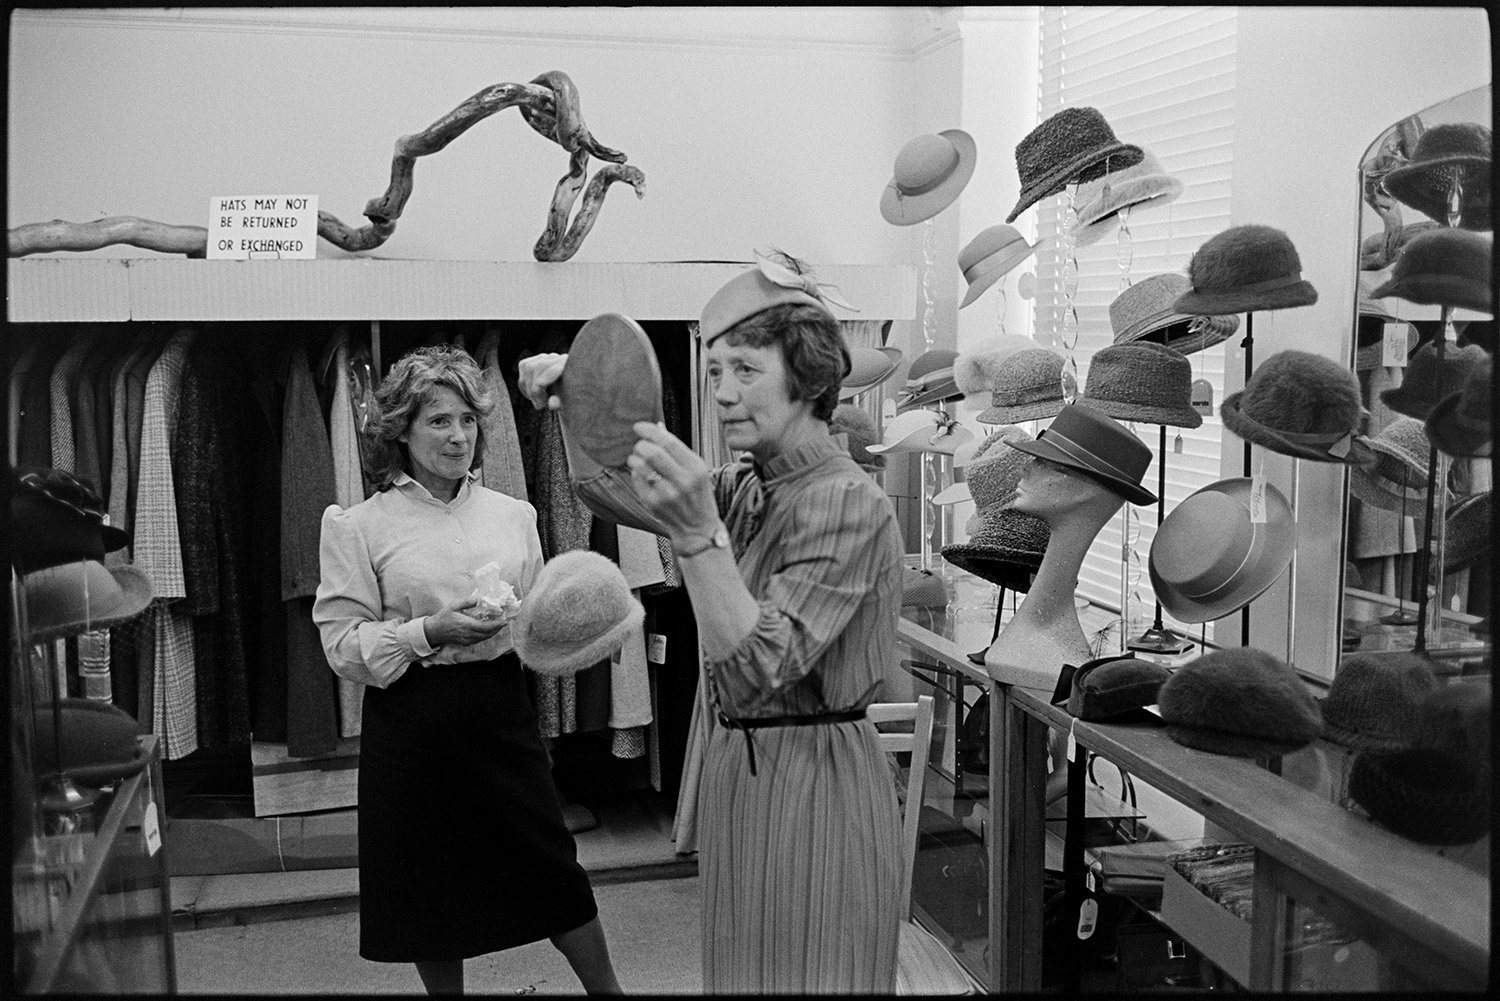 Shop assistant helping woman choose a hat in hat department of clothes shop. Hat display. 
[A shop assistant in Trapnells clothes shop, in Bideford High Street, helping a woman choose a hat. The customer is holding a mirror and looking at the hat she is trying on. A hat display and clothes rail can be seen in the background.]